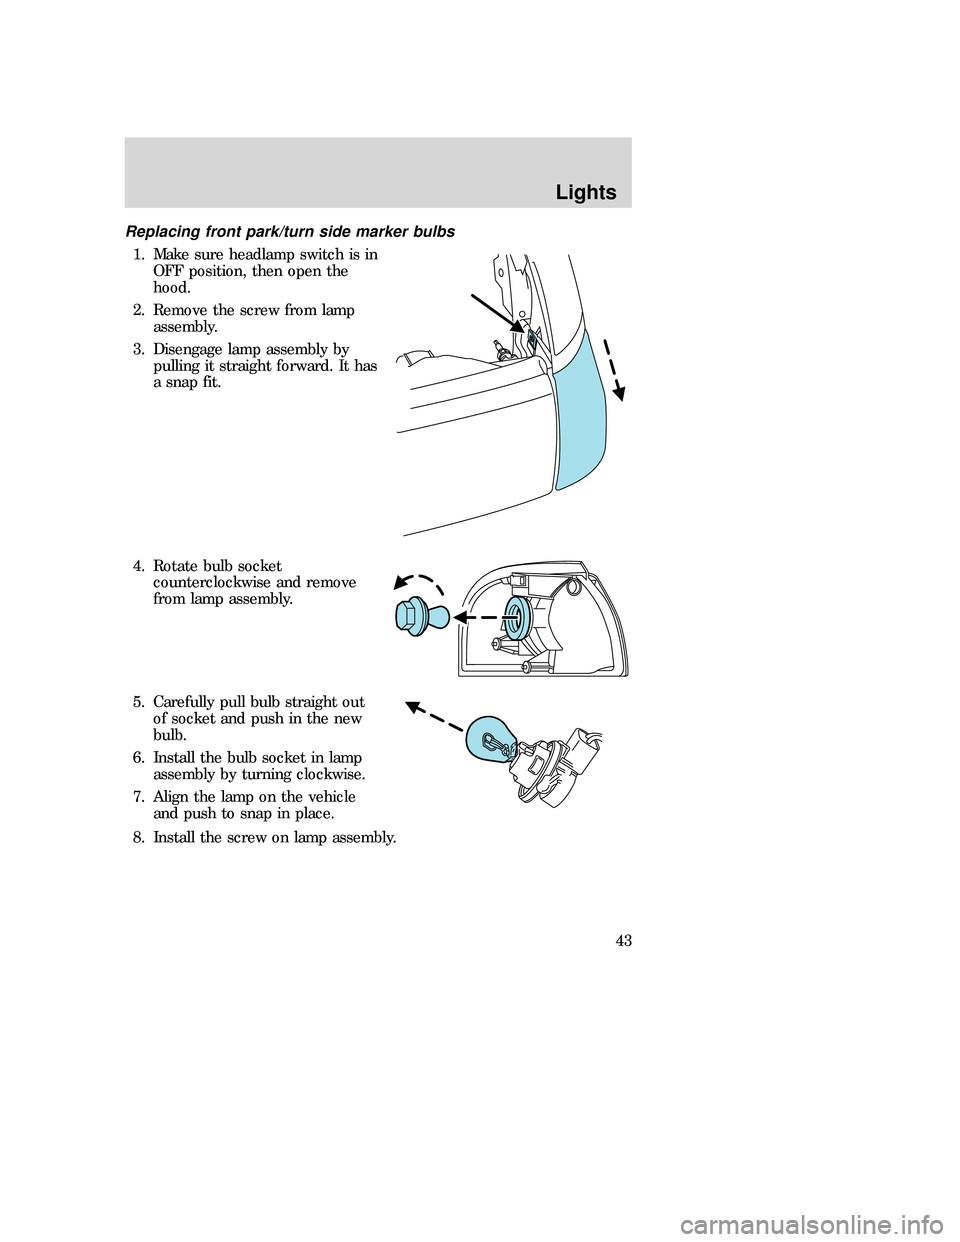 MAZDA MODEL B-SERIES 2006   (in English) Service Manual Replacing front park/turn side marker bulbs
1. Make sure headlamp switch is in
OFF position, then open the
hood.
2. Remove the screw from lamp
assembly.
3. Disengage lamp assembly by
pulling it straig